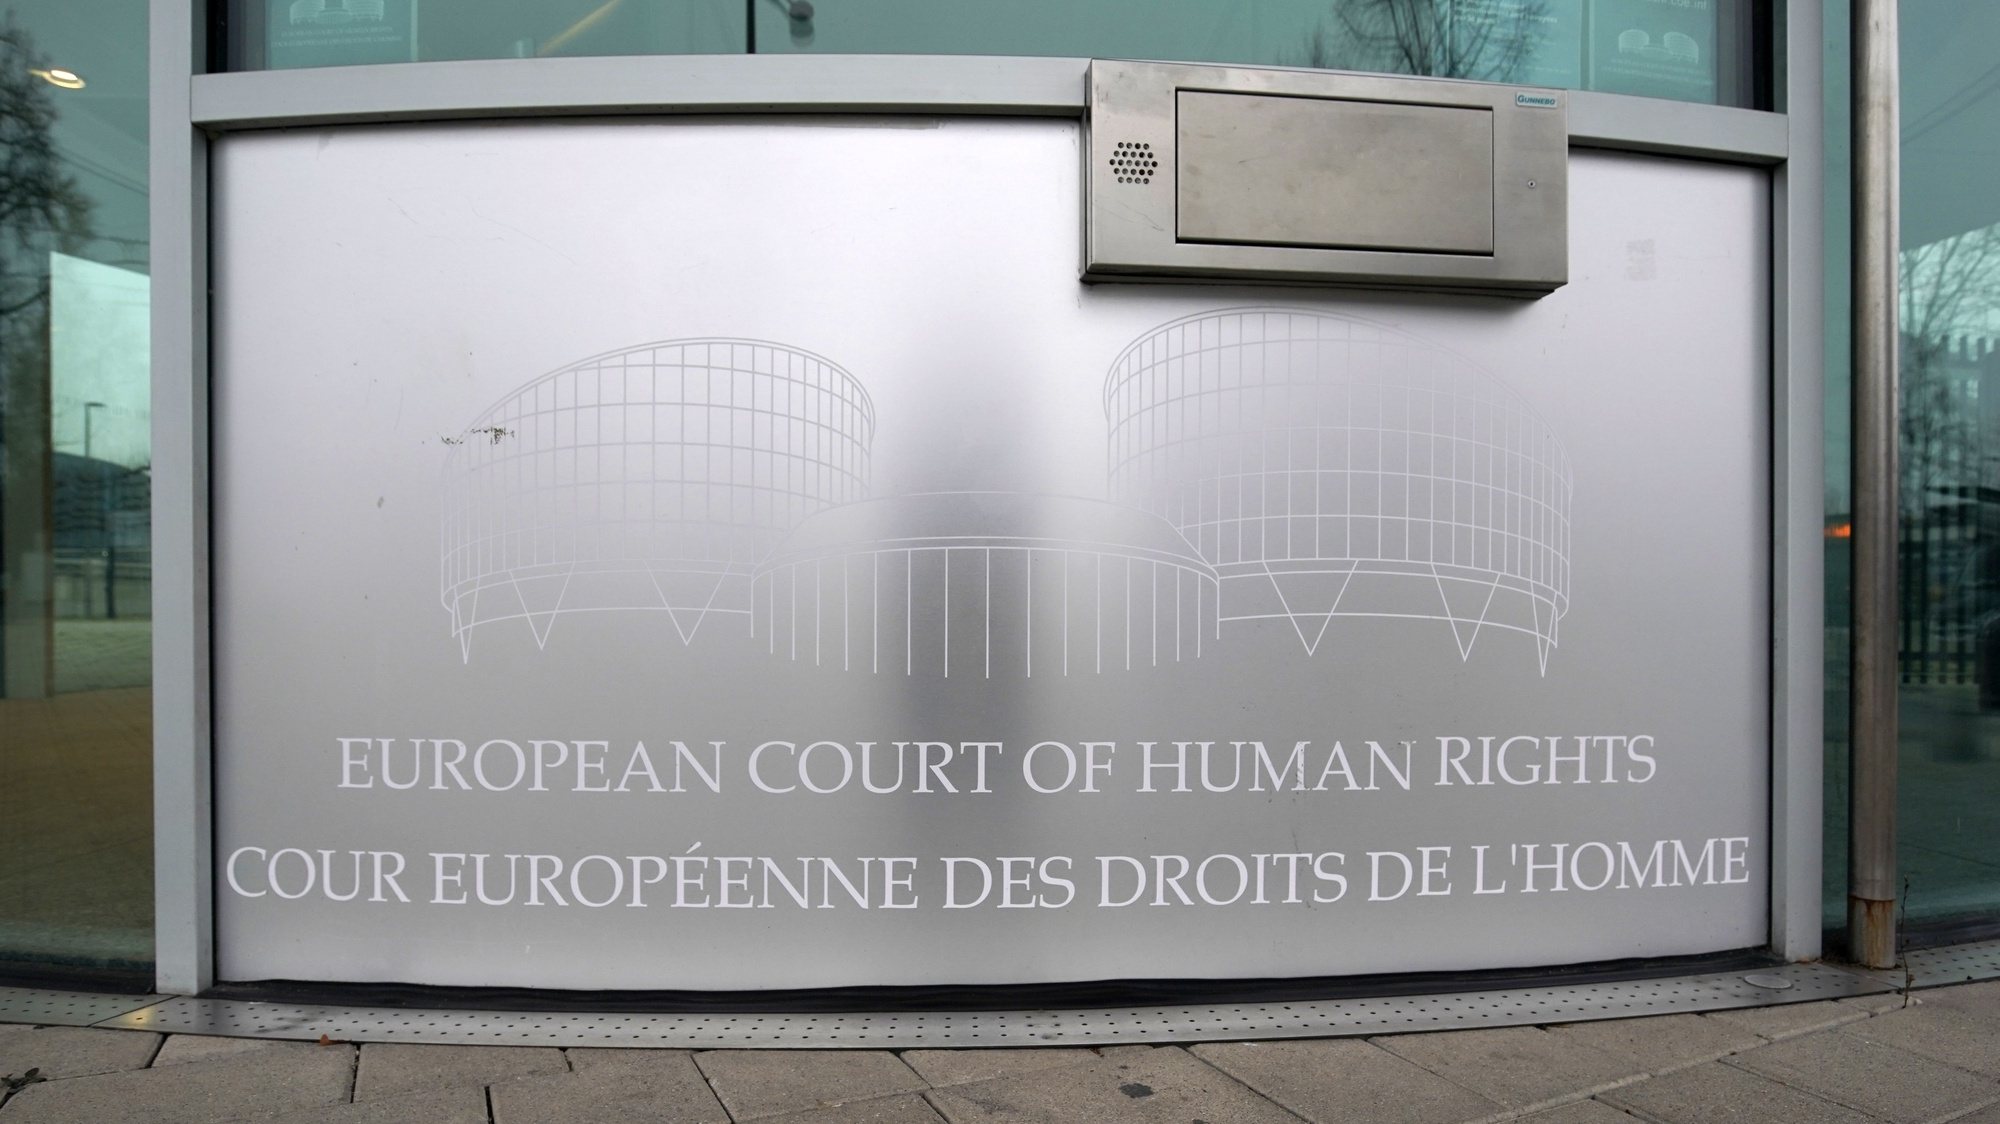 epa09709947 A view of signage outside the European Court of Human Rights (ECHR) building during the beginning of a hearing in the case of Ukraine and the Netherlands against Russia, in Strasbourg, France, 26 January 2022. The European Court of Human Rights is holding on the day a Grand Chamber hearing on admissibility in the case of Ukraine and the Netherlands against Russia concerning events in eastern Ukraine, including the downing of flight MH17. On 17 July 2014, Malaysia Airlines flight MH17 crashed in eastern Ukraine, killing all 298 people on board.  EPA/